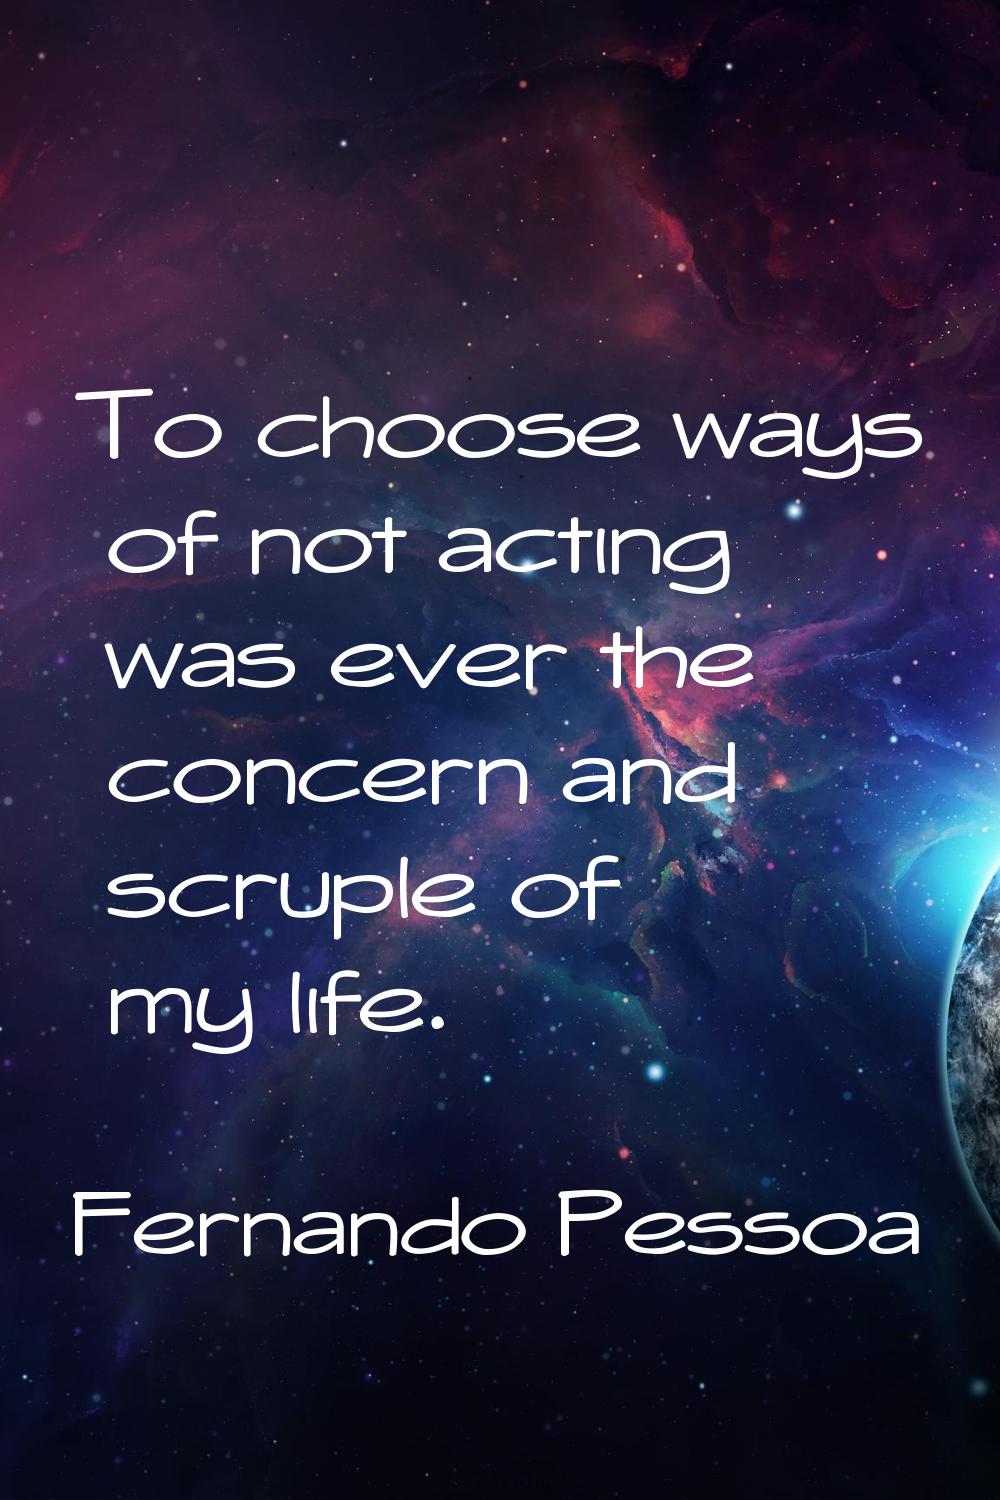 To choose ways of not acting was ever the concern and scruple of my life.